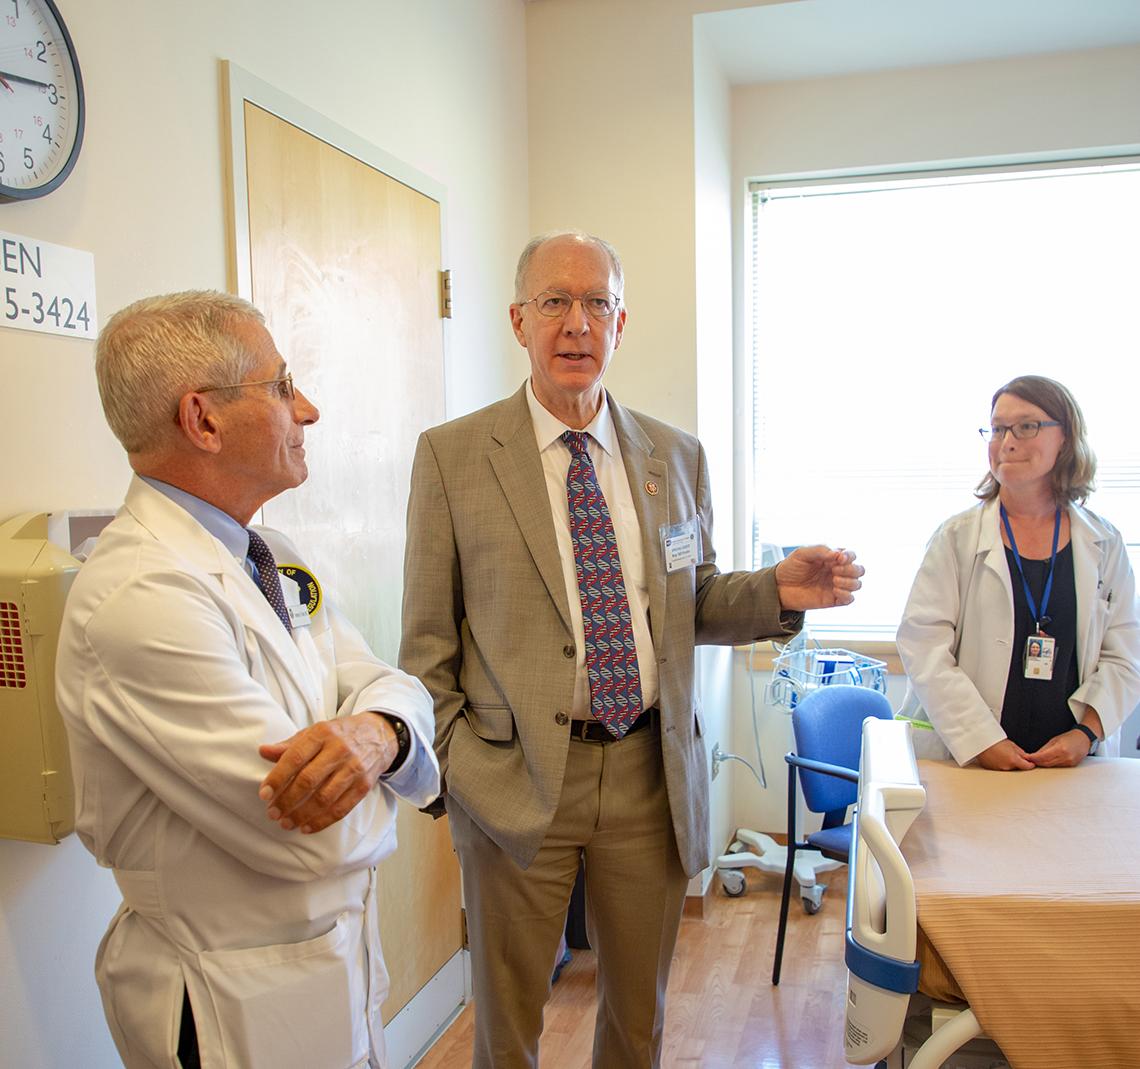 Dr. Fauci and Dr. Freeman talk with Rep. Bill Foster at NIAID's primary immune deficiency clinic.